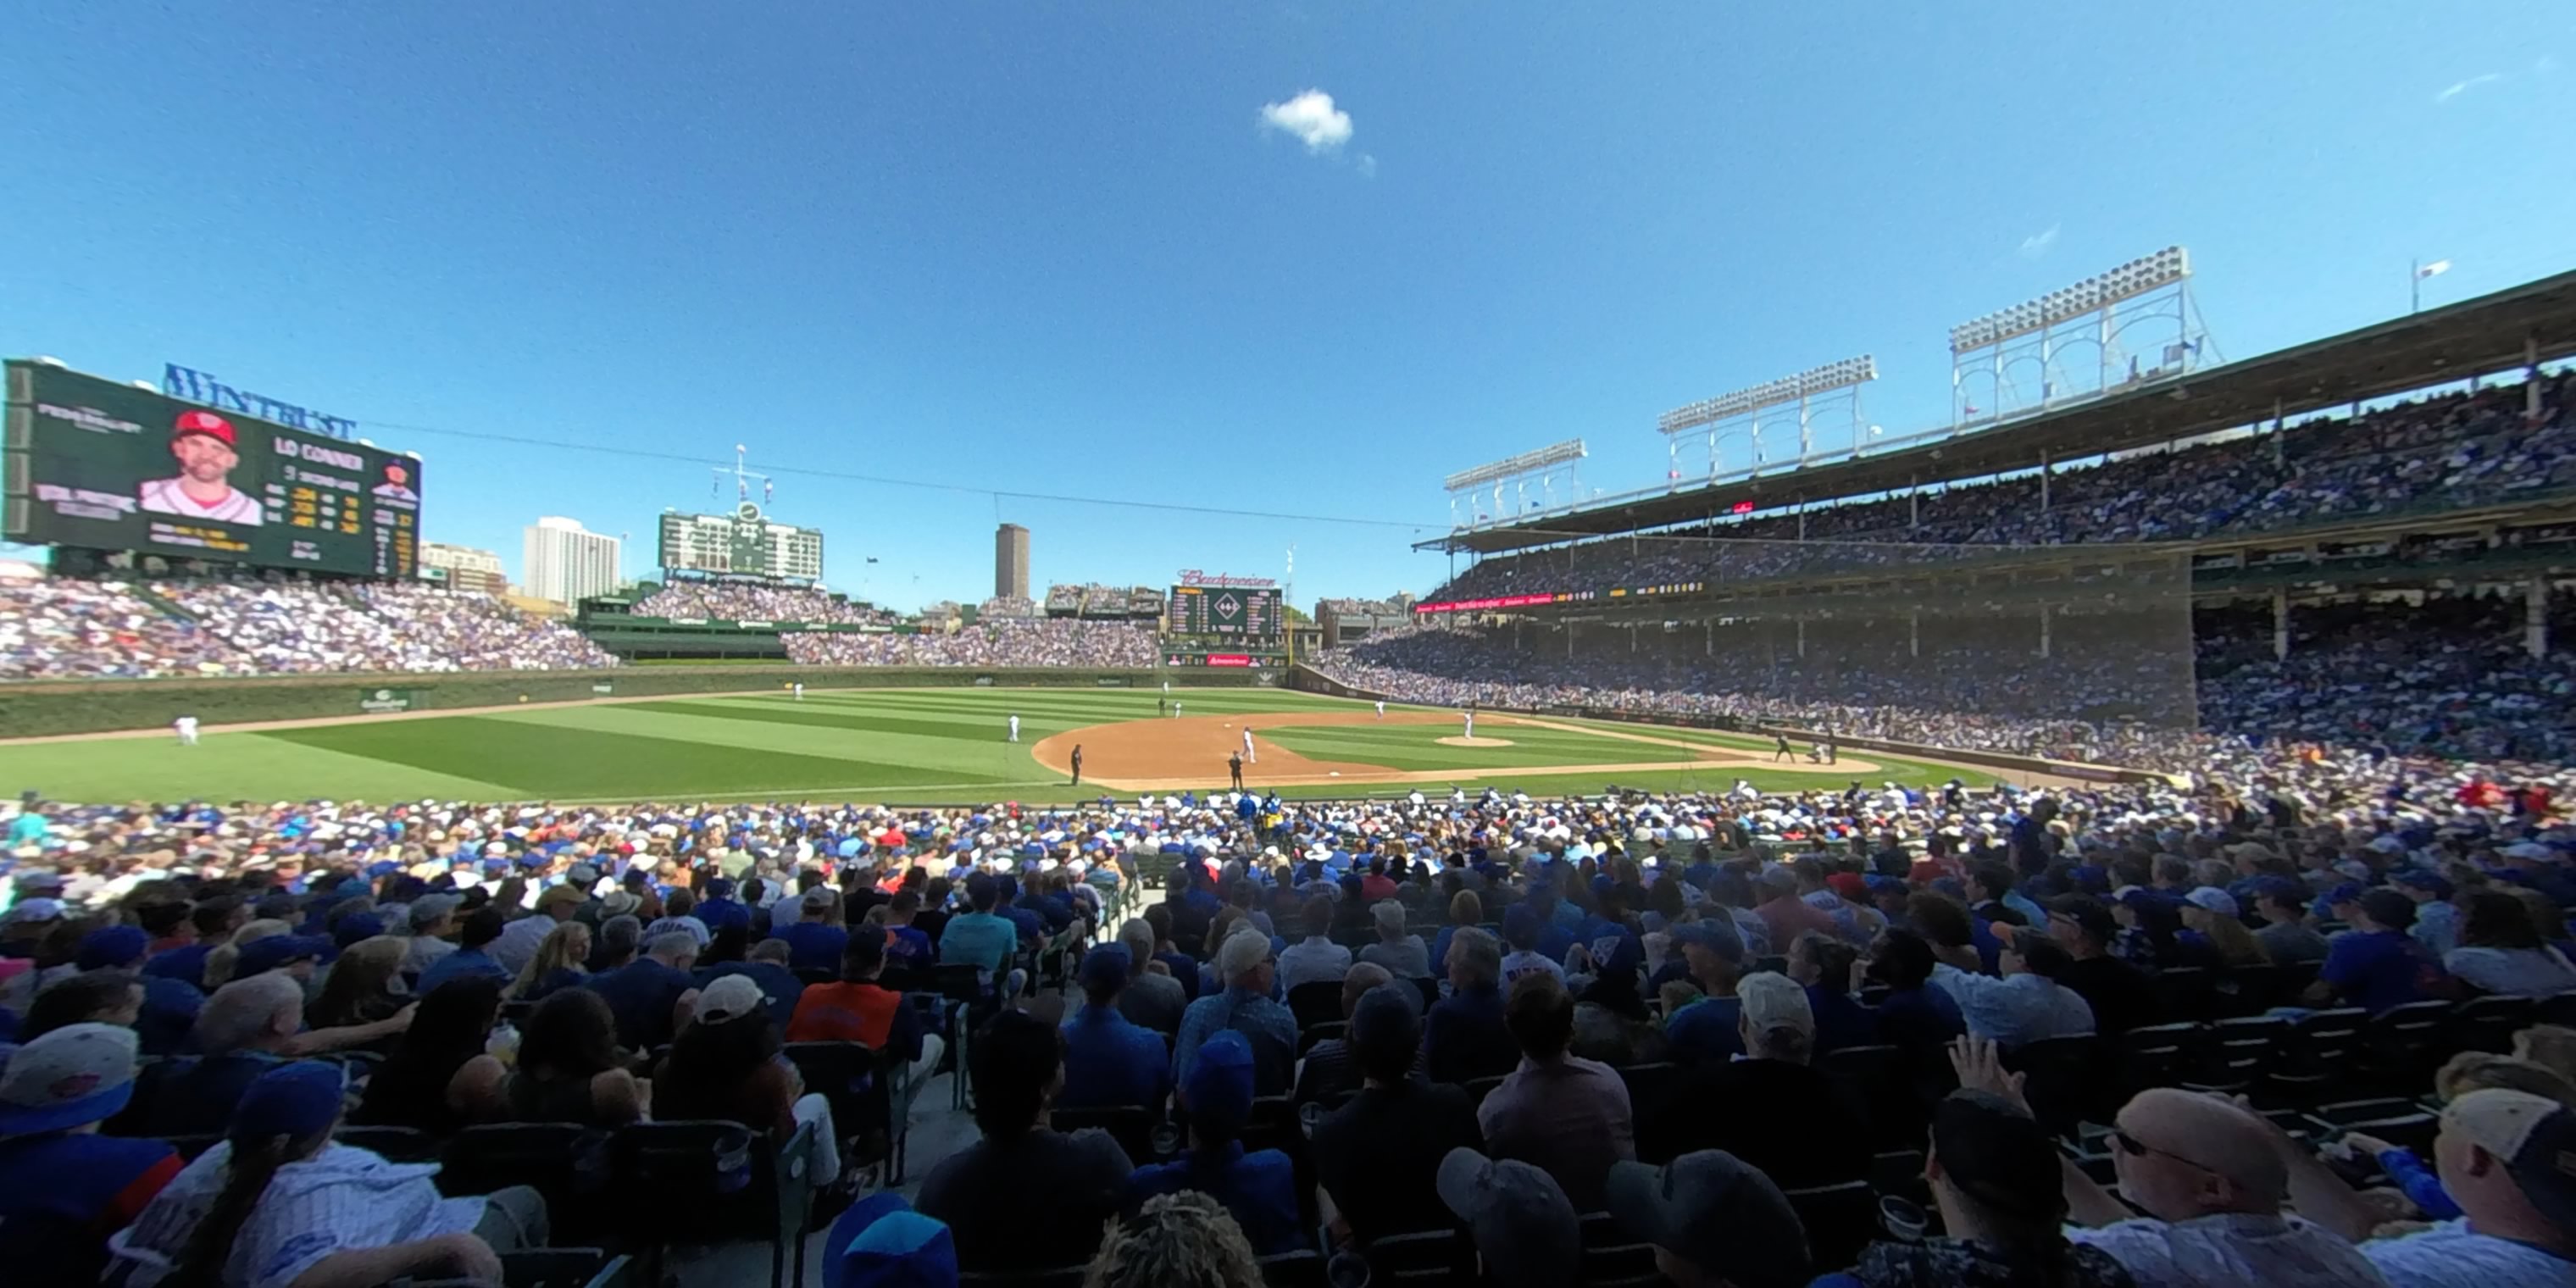 section 109 panoramic seat view  for baseball - wrigley field